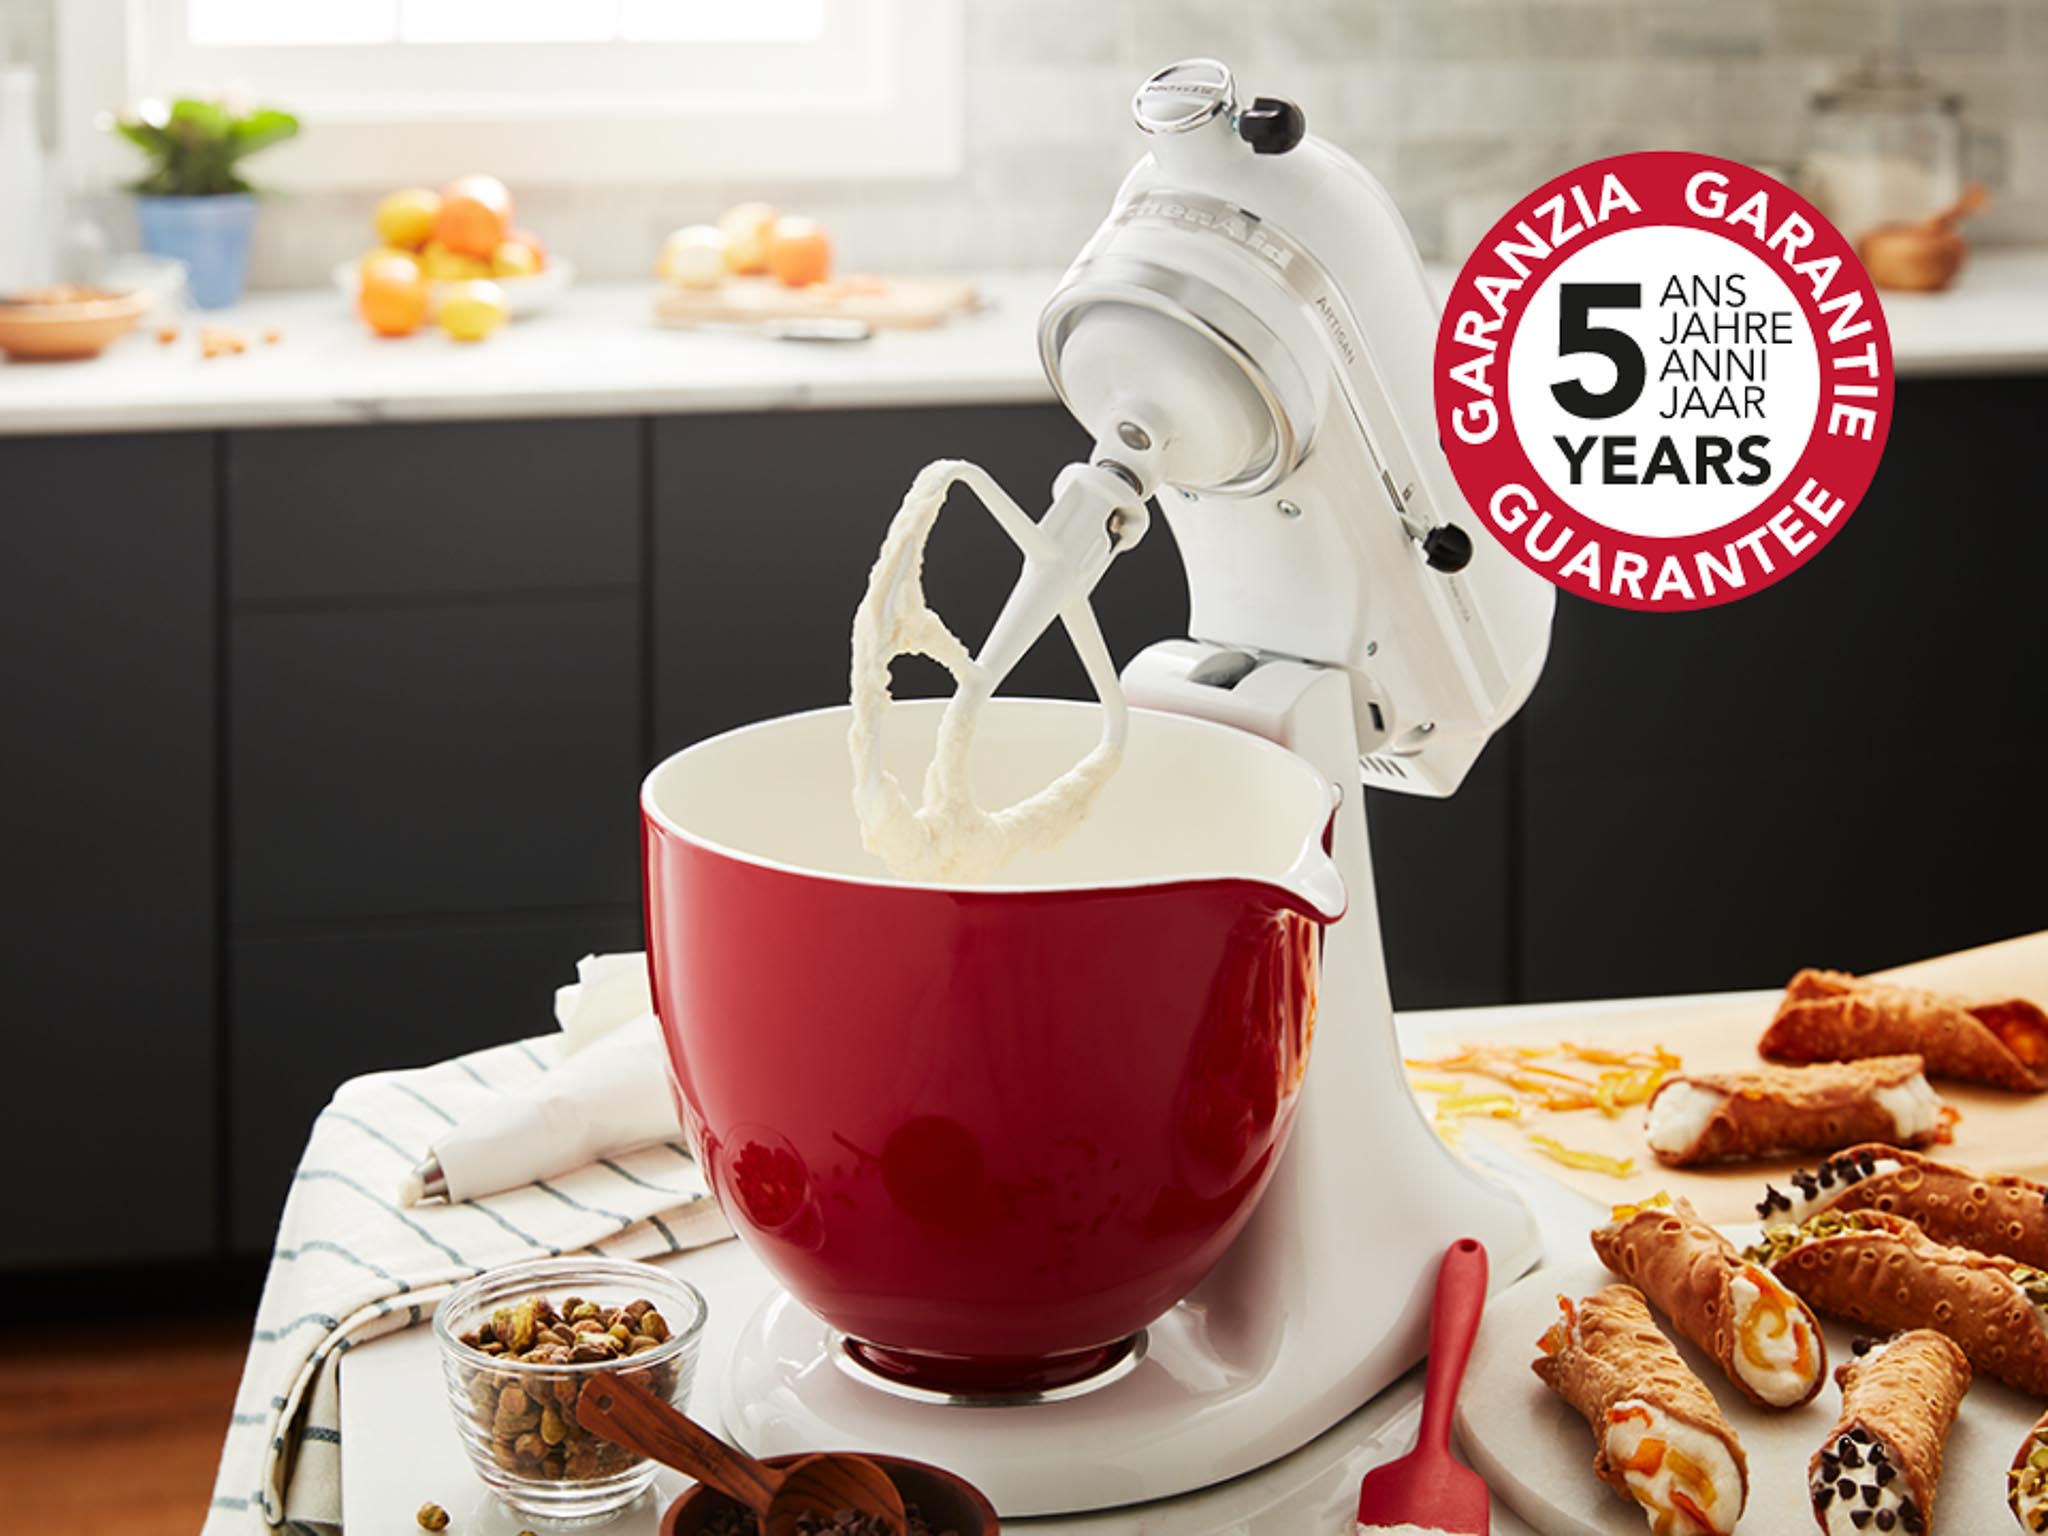 Accessories-ceramic-bowl-red empire 5 year guarantee mixer and bowl with sweets